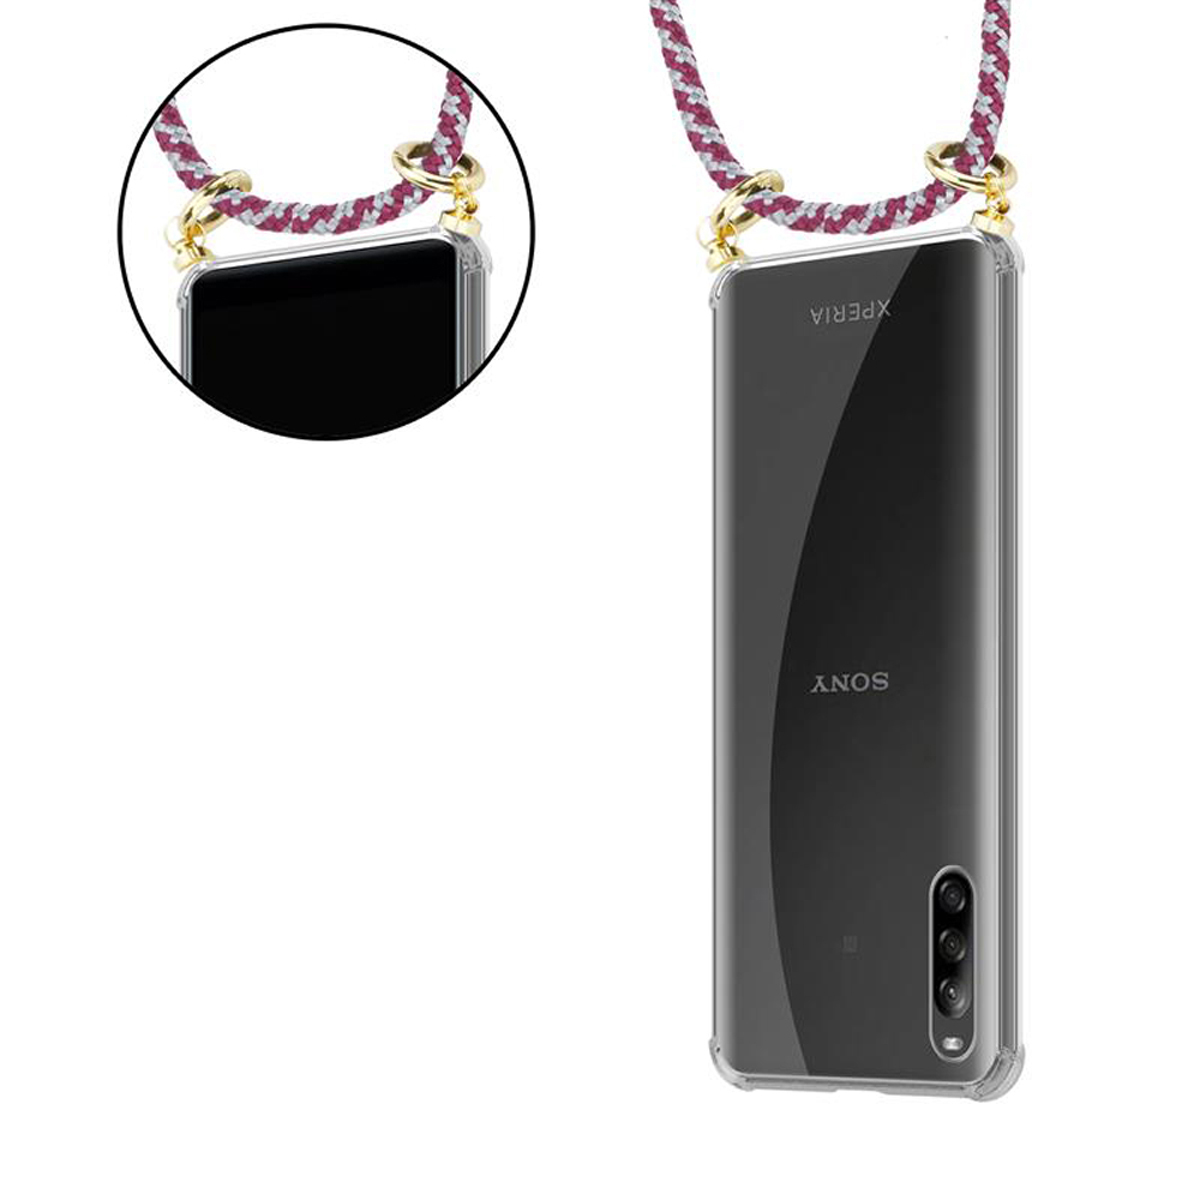 Sony, und Band mit Backcover, Xperia Ringen, ROT abnehmbarer Handy WEIß Kordel Kette Gold CADORABO Hülle, L4,